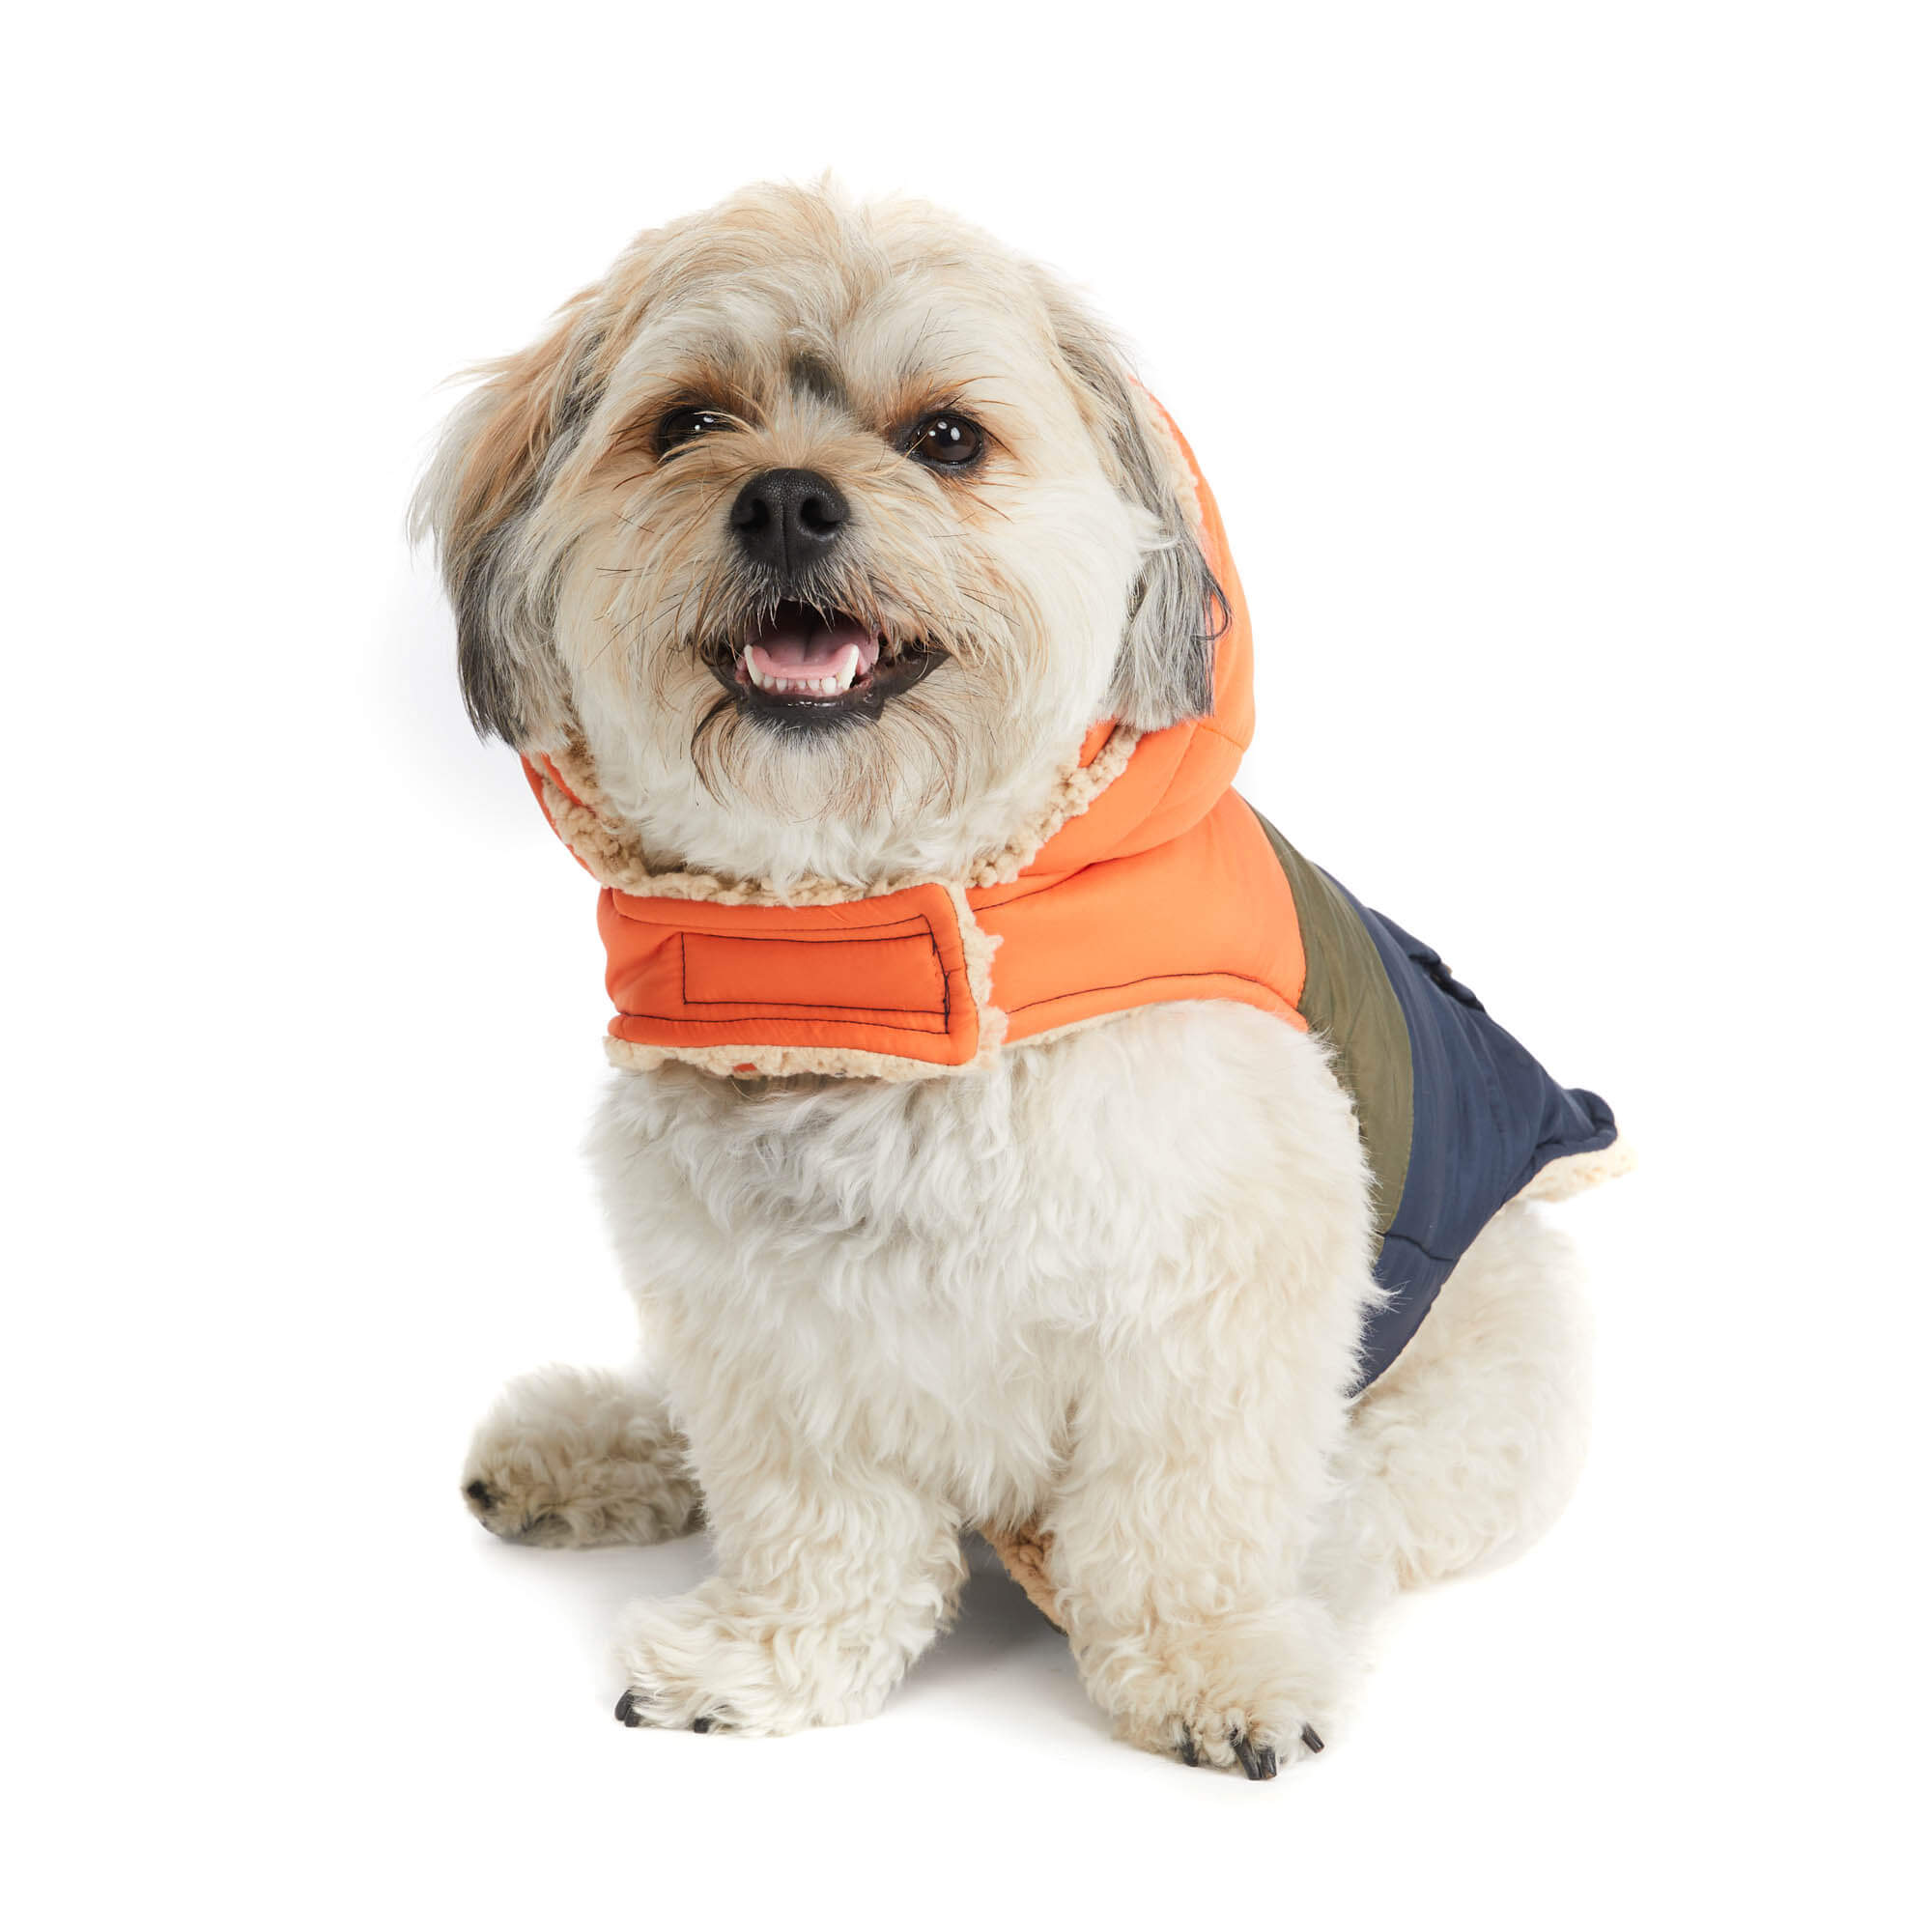 Dog wearing orange and blue parka. Front view